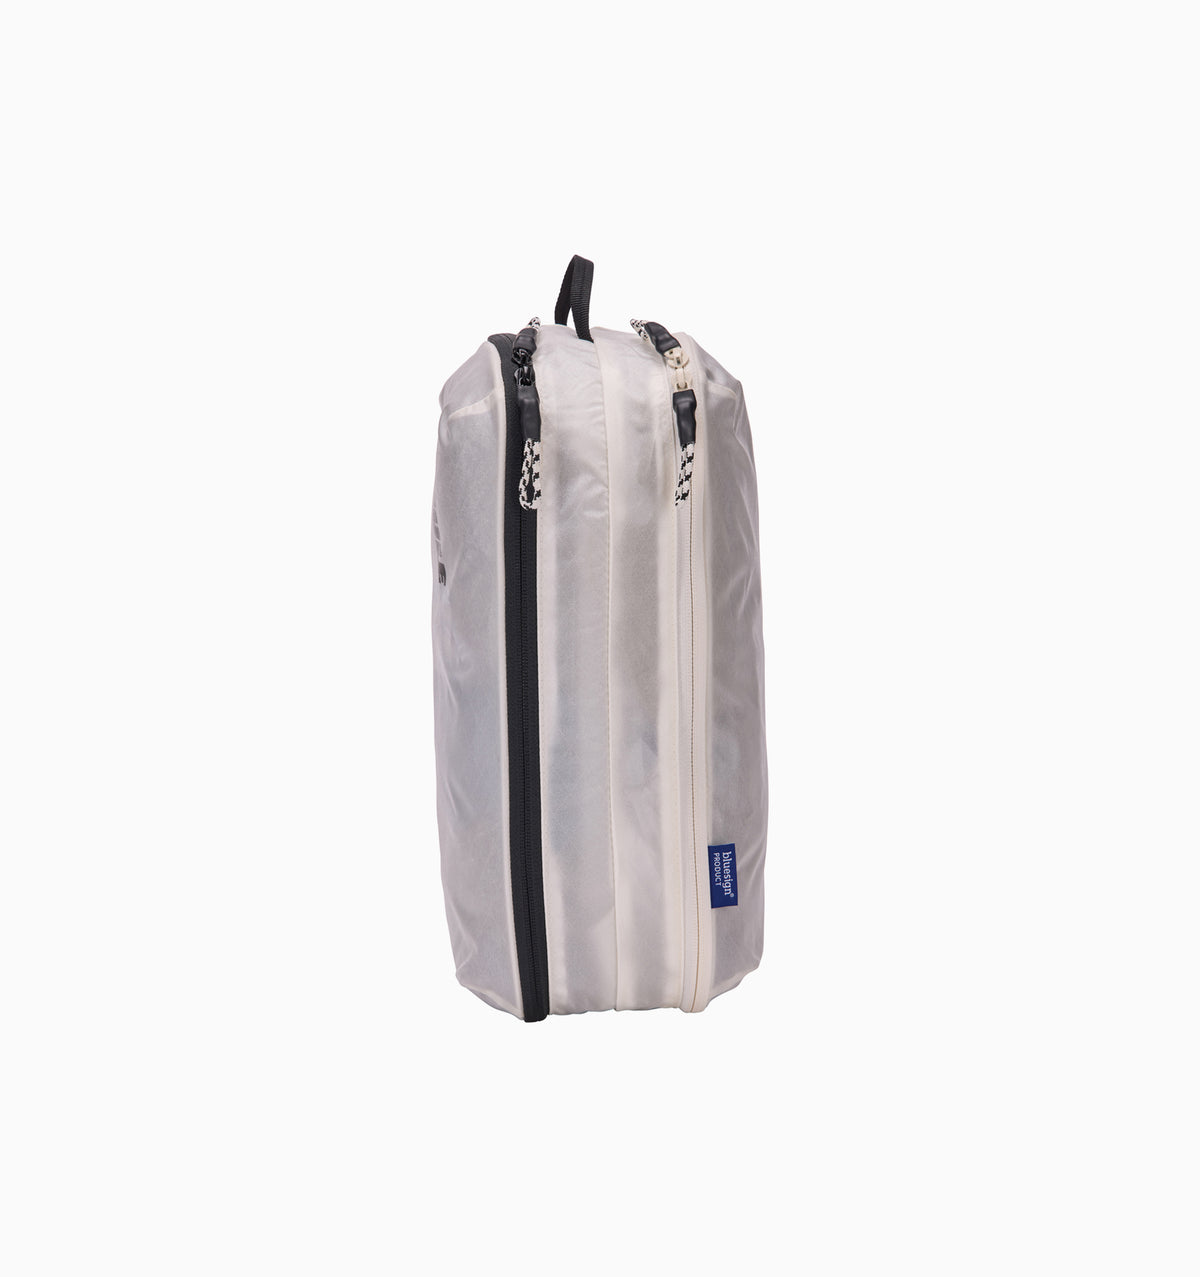 Thule Packing Cube - Clean/Dirty - White